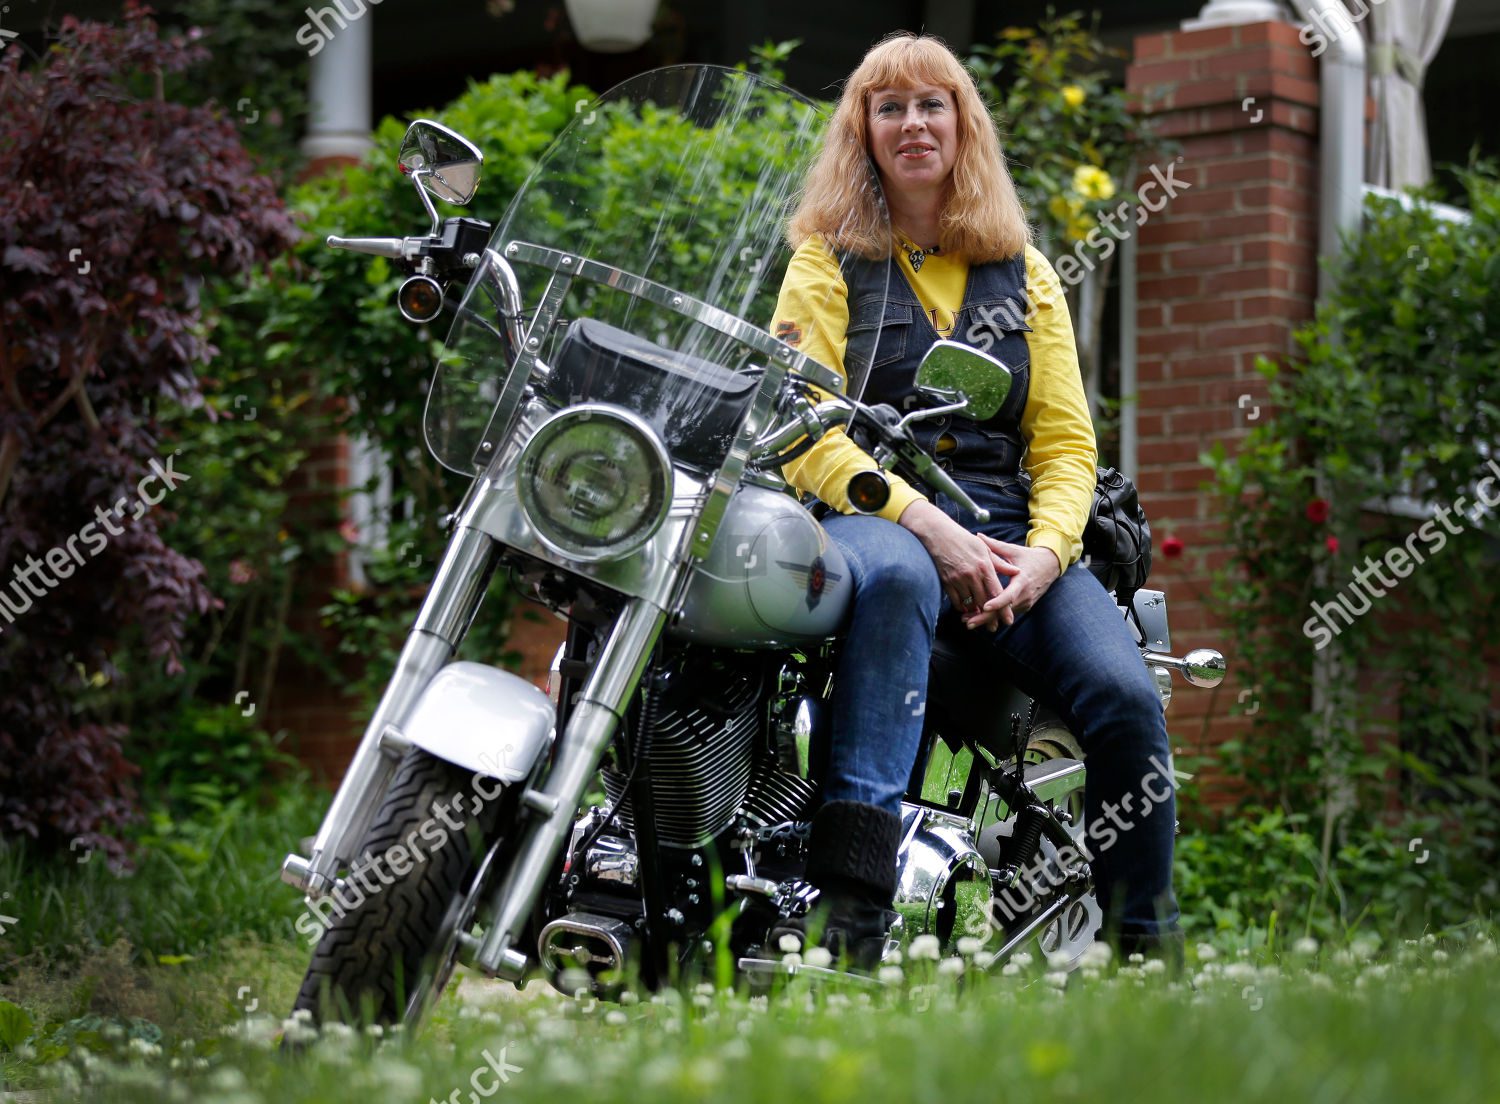 Mandatory Credit: Photo by Chuck Burton/AP/Shutterstock (6210322b)
Crystal Swift Crystal Swift poses on her Fat Boy Harley-Davidson at her home in Charlotte, N.C. Harley is the top seller of motorcycles in its class in the U.S. and leads in sales among women, minorities and younger adults as well as the middle-aged men
Harley Davidson, Charlotte, USA